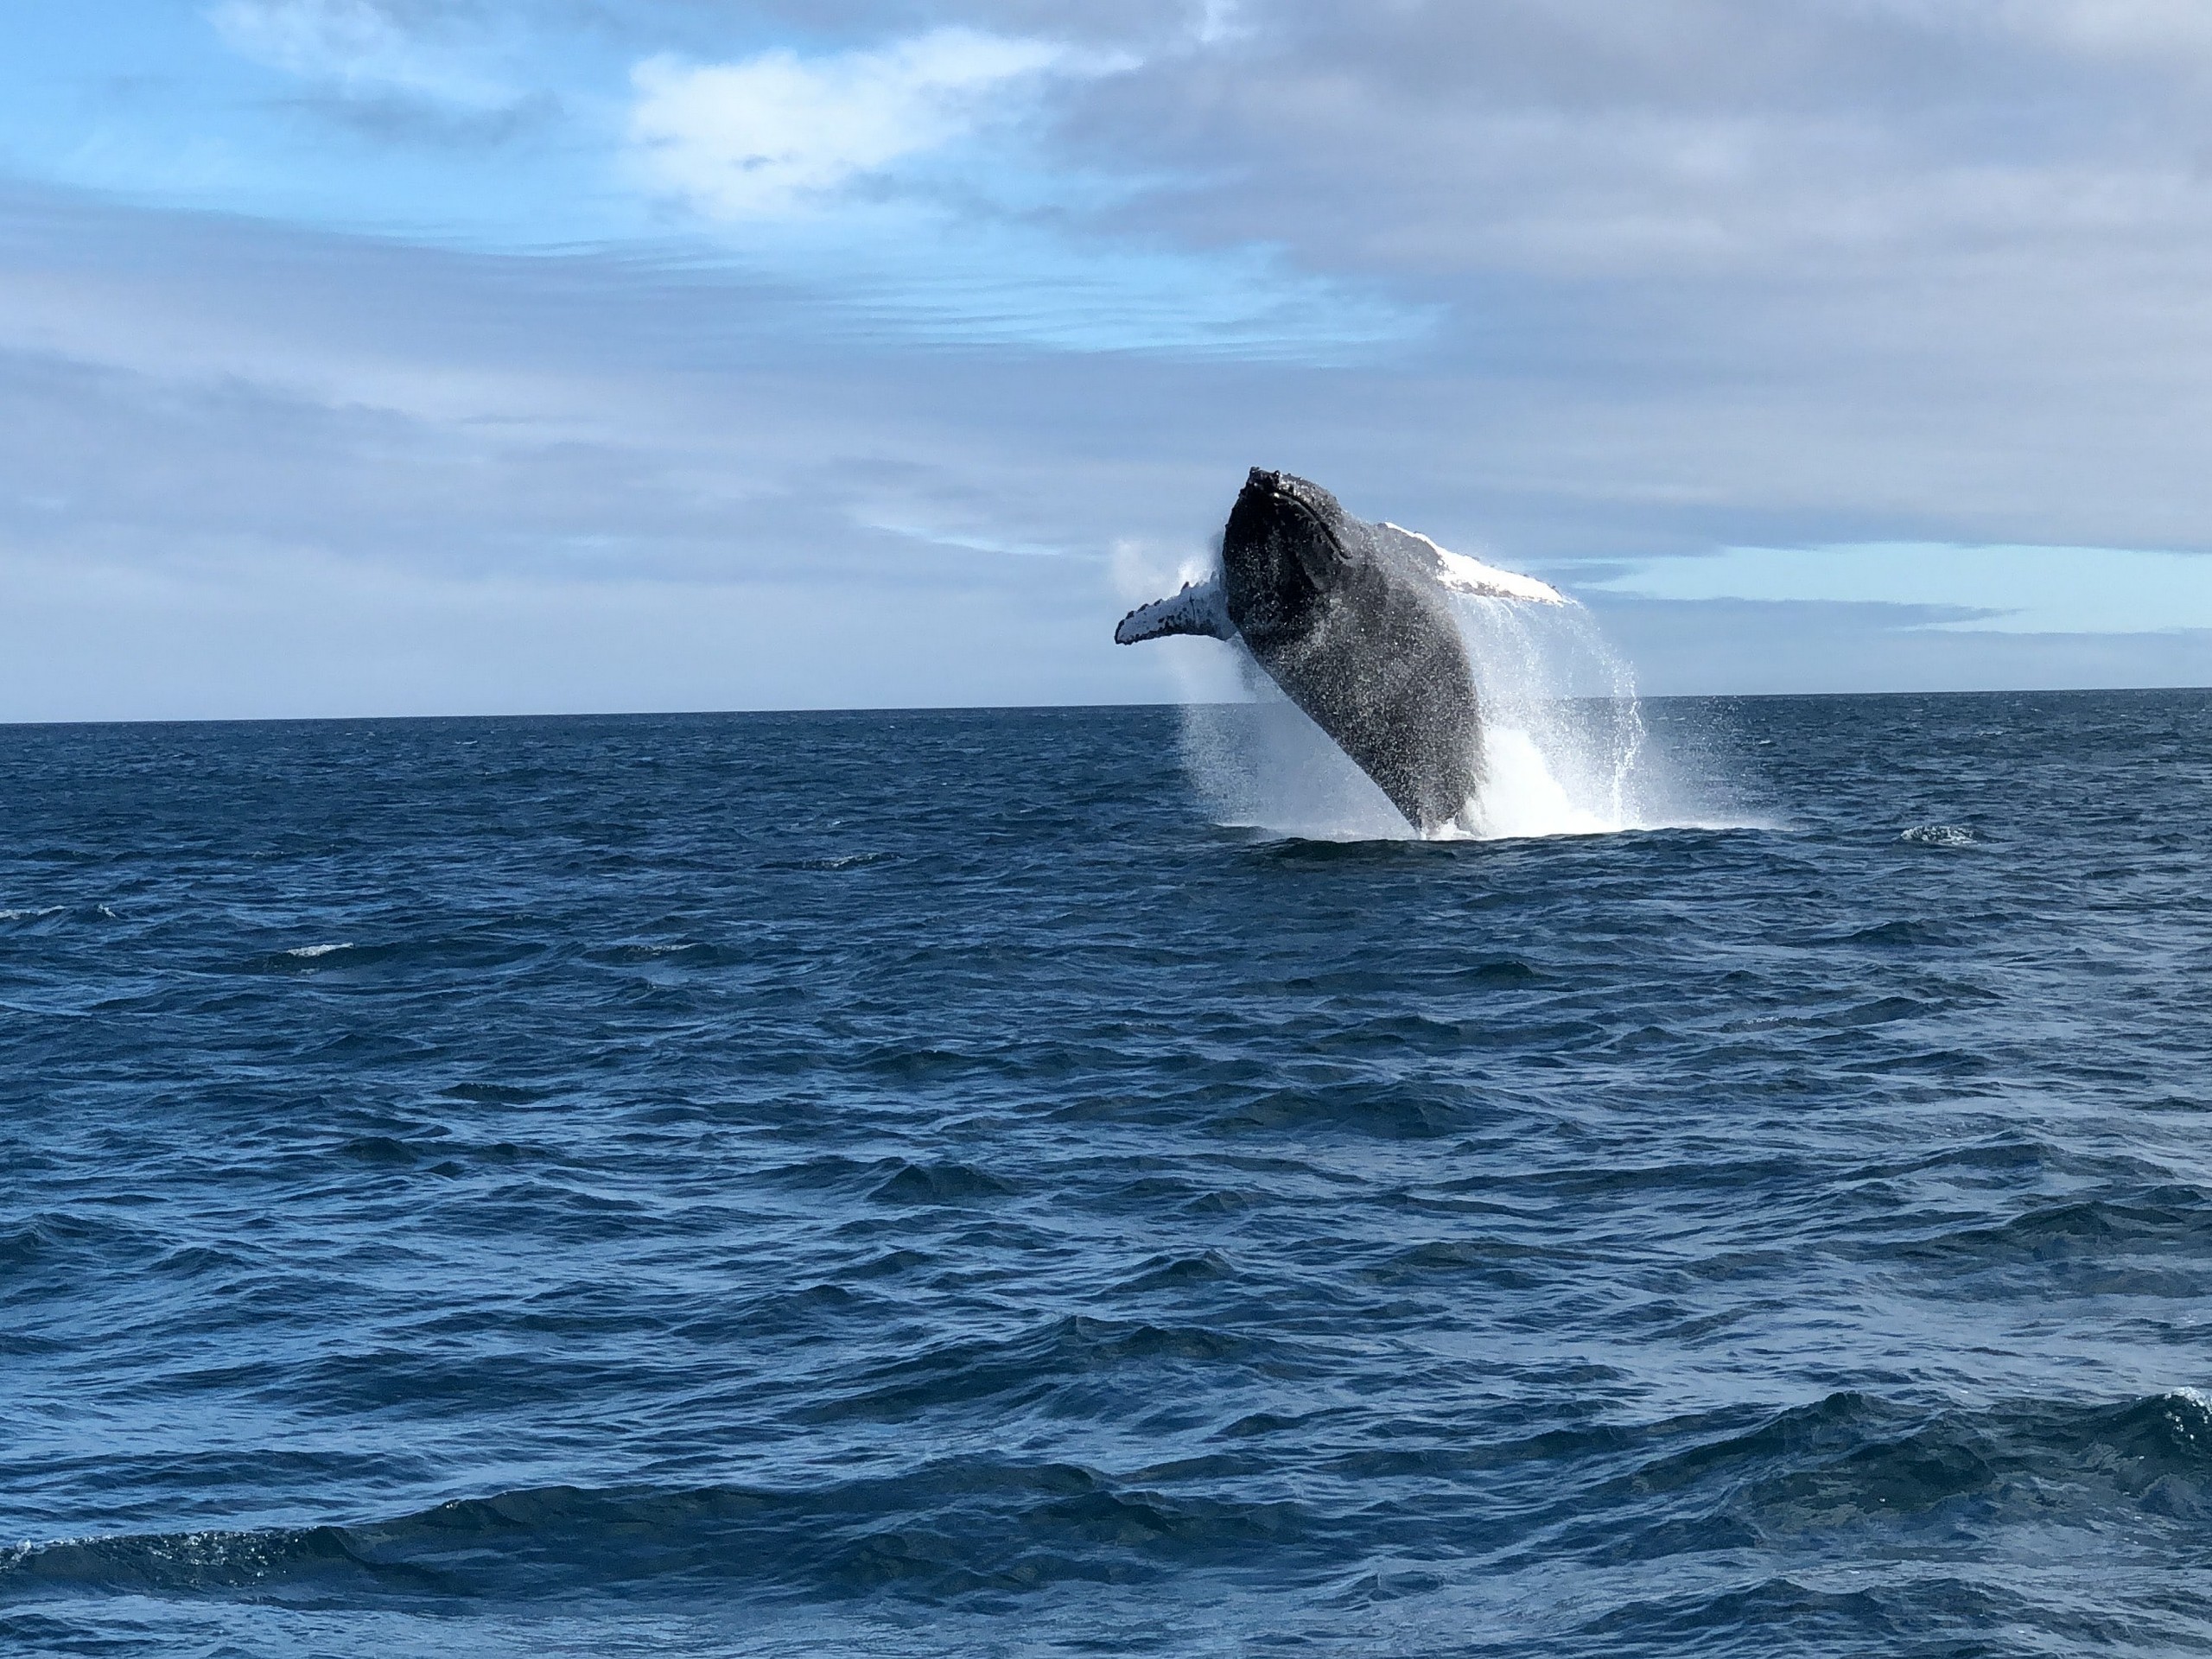 Humpback whale jumping out of the water in Galapagos